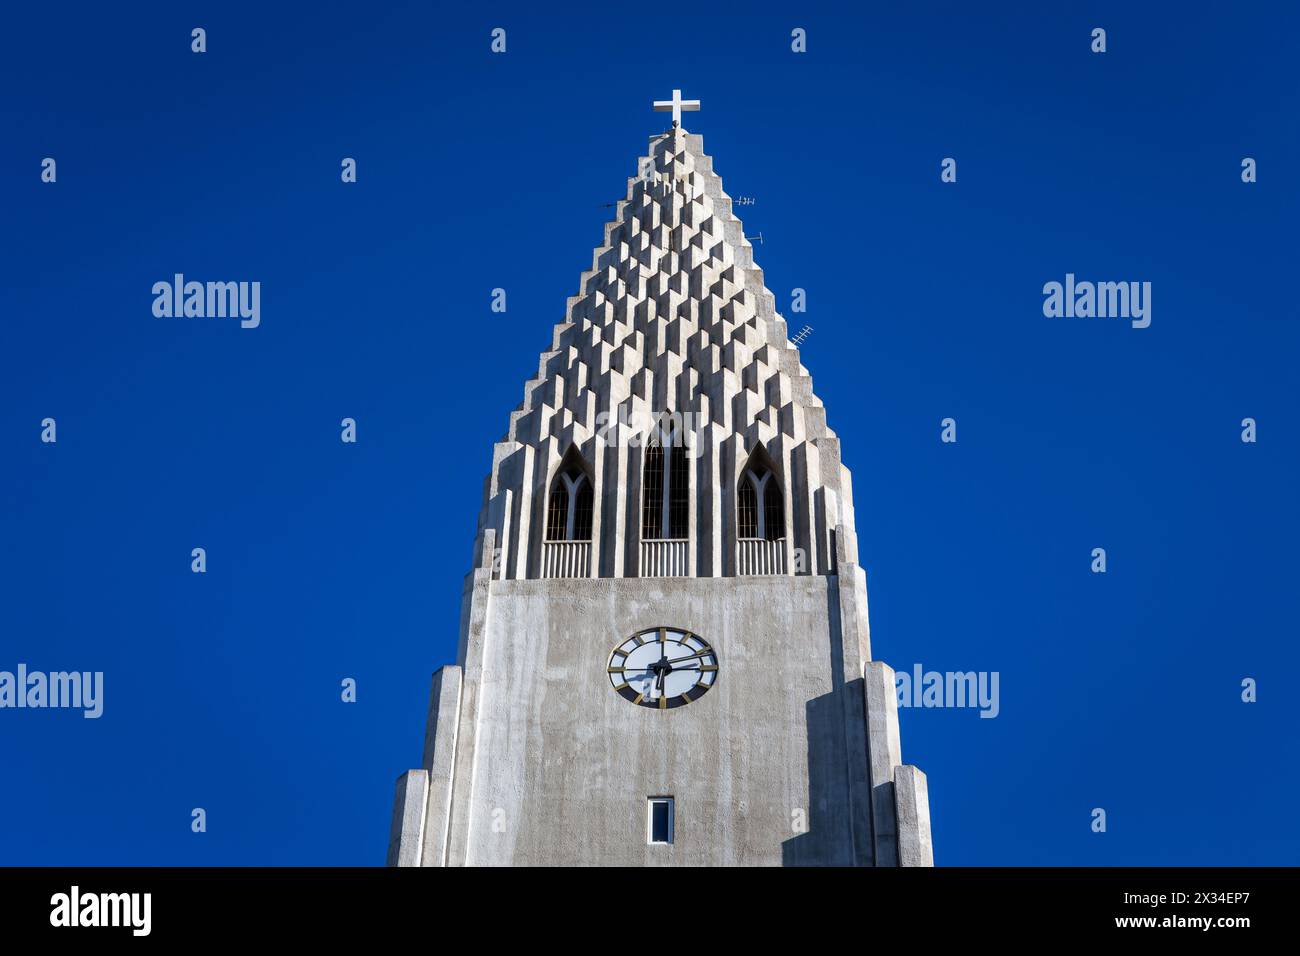 Hallgrimskirkja church tower top with Holy Cross and clock, Reykjavik, Iceland, modern belfry against clear blue sky, symmetrical view. Stock Photo